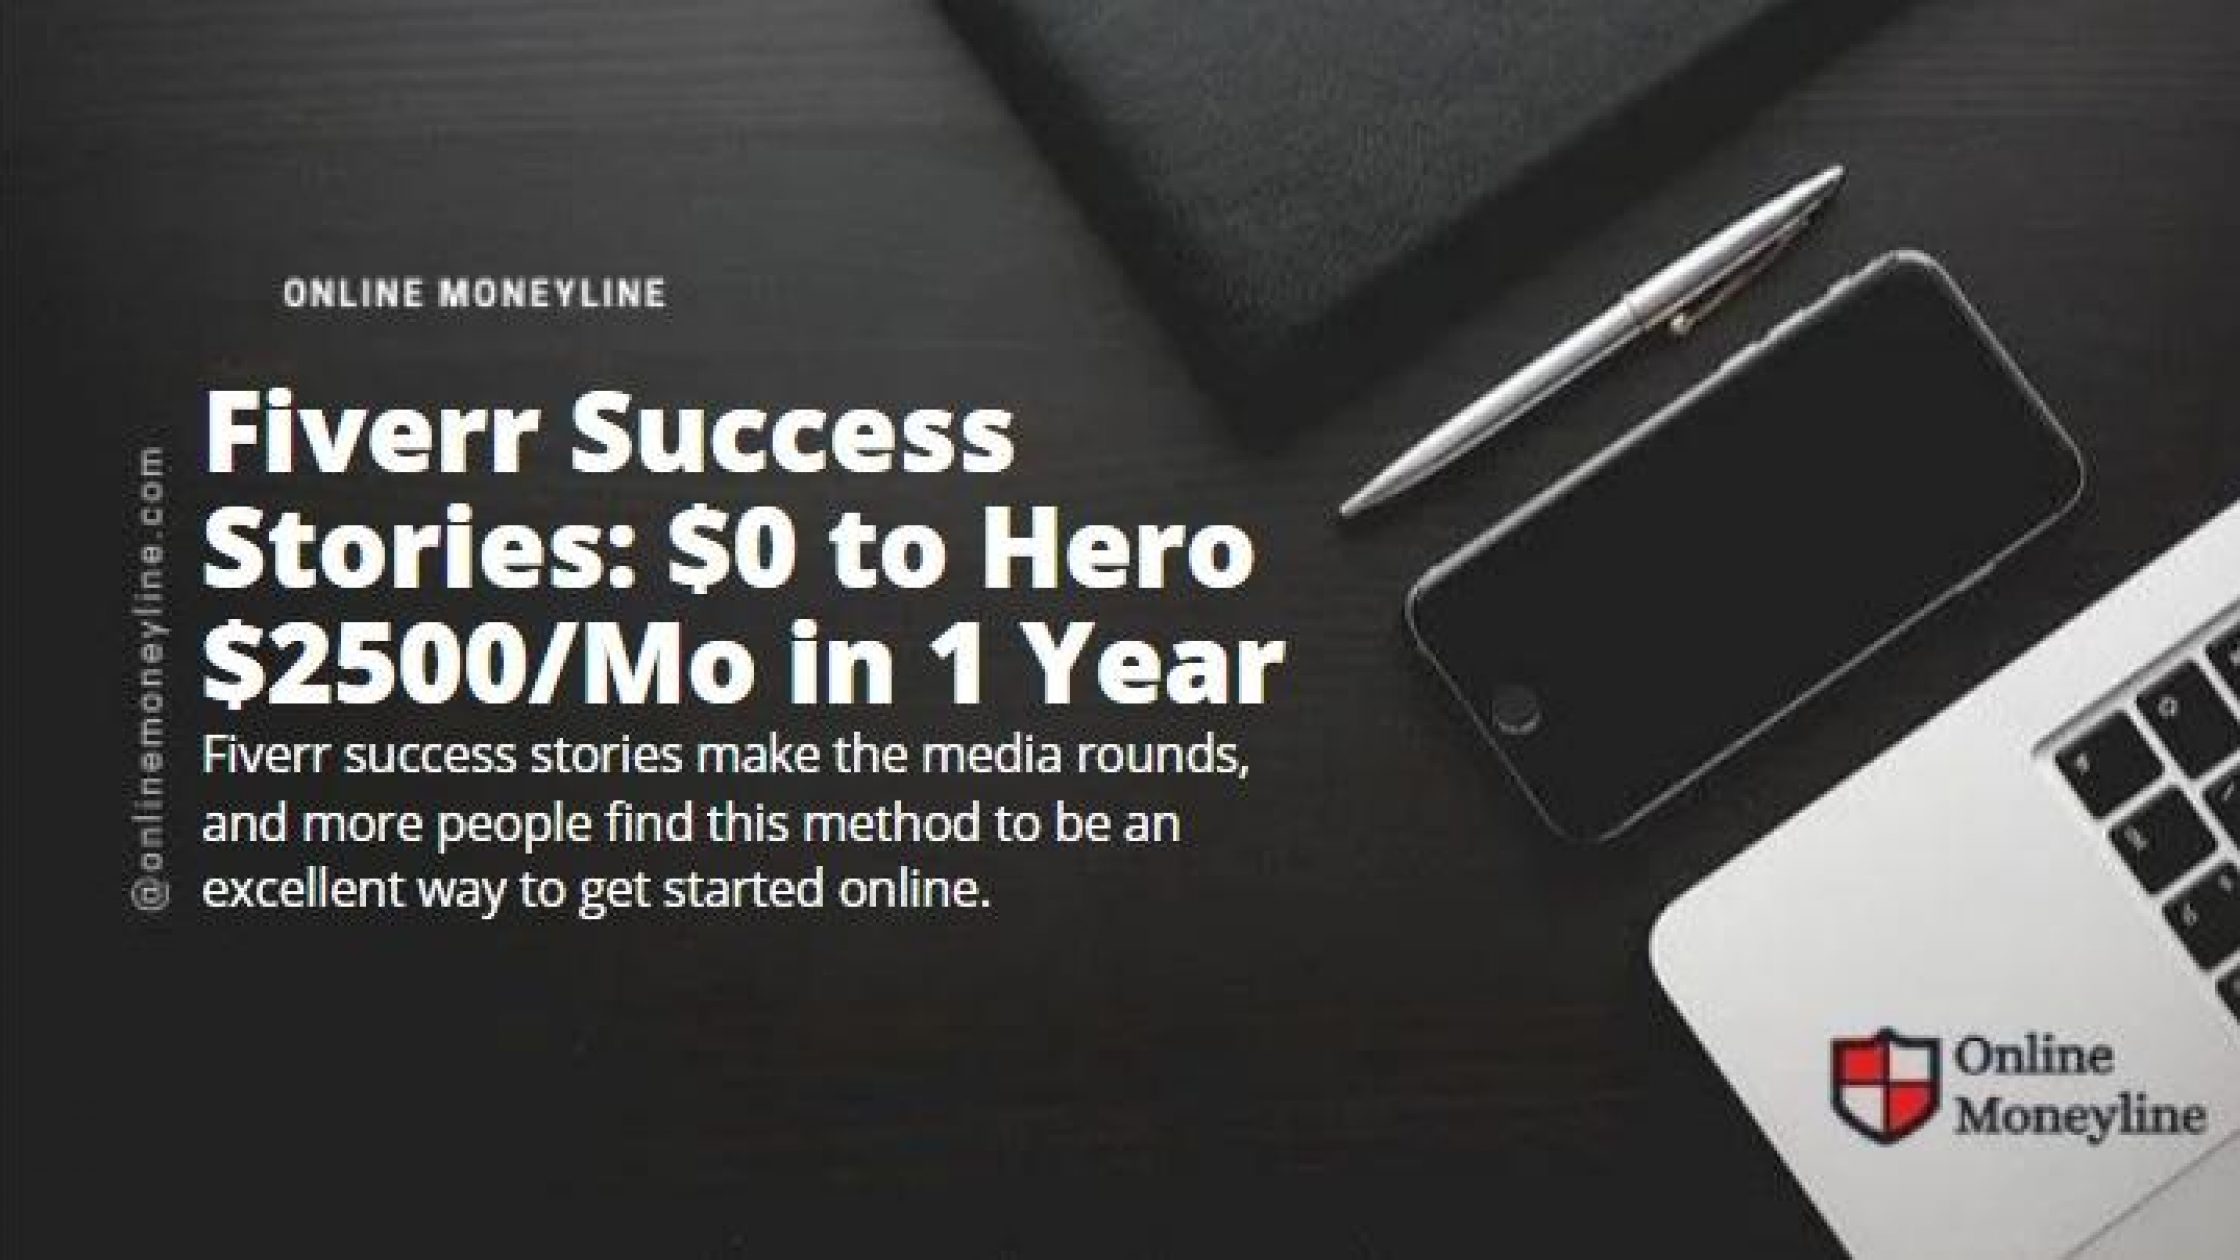 Fiverr Success Stories: $0 to Hero $2500/Mo in 1 Year